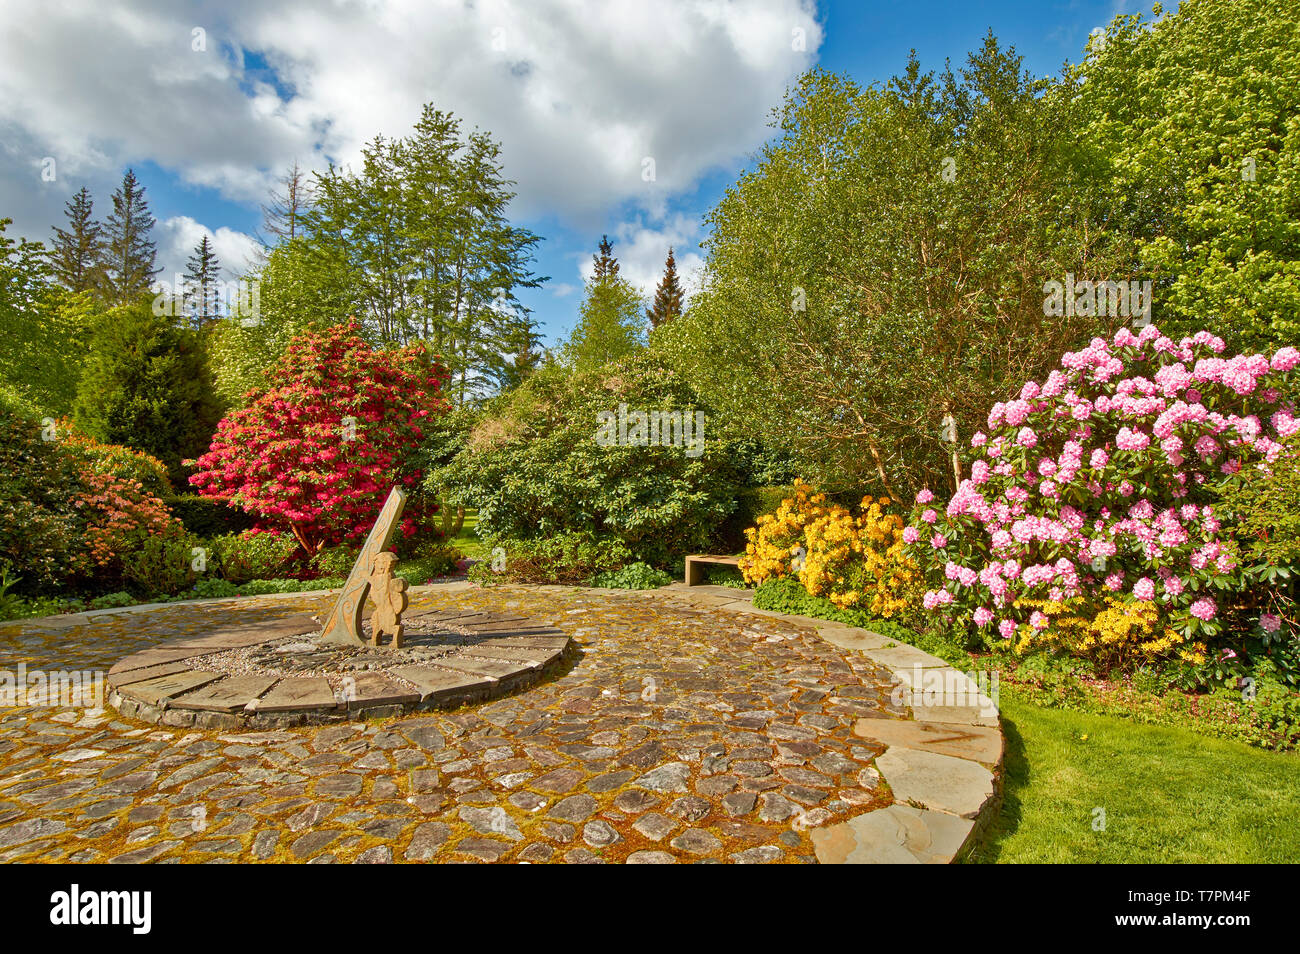 ATTADALE GARDENS STRATHCARRON WESTER ROSS SCOTLAND  IN SPRINGTIME WITH LARGE  SUN DIAL AND A WILDCAT HOLDING THE GNOMON SURROUNDED BY RED AND PINK RHO Stock Photo